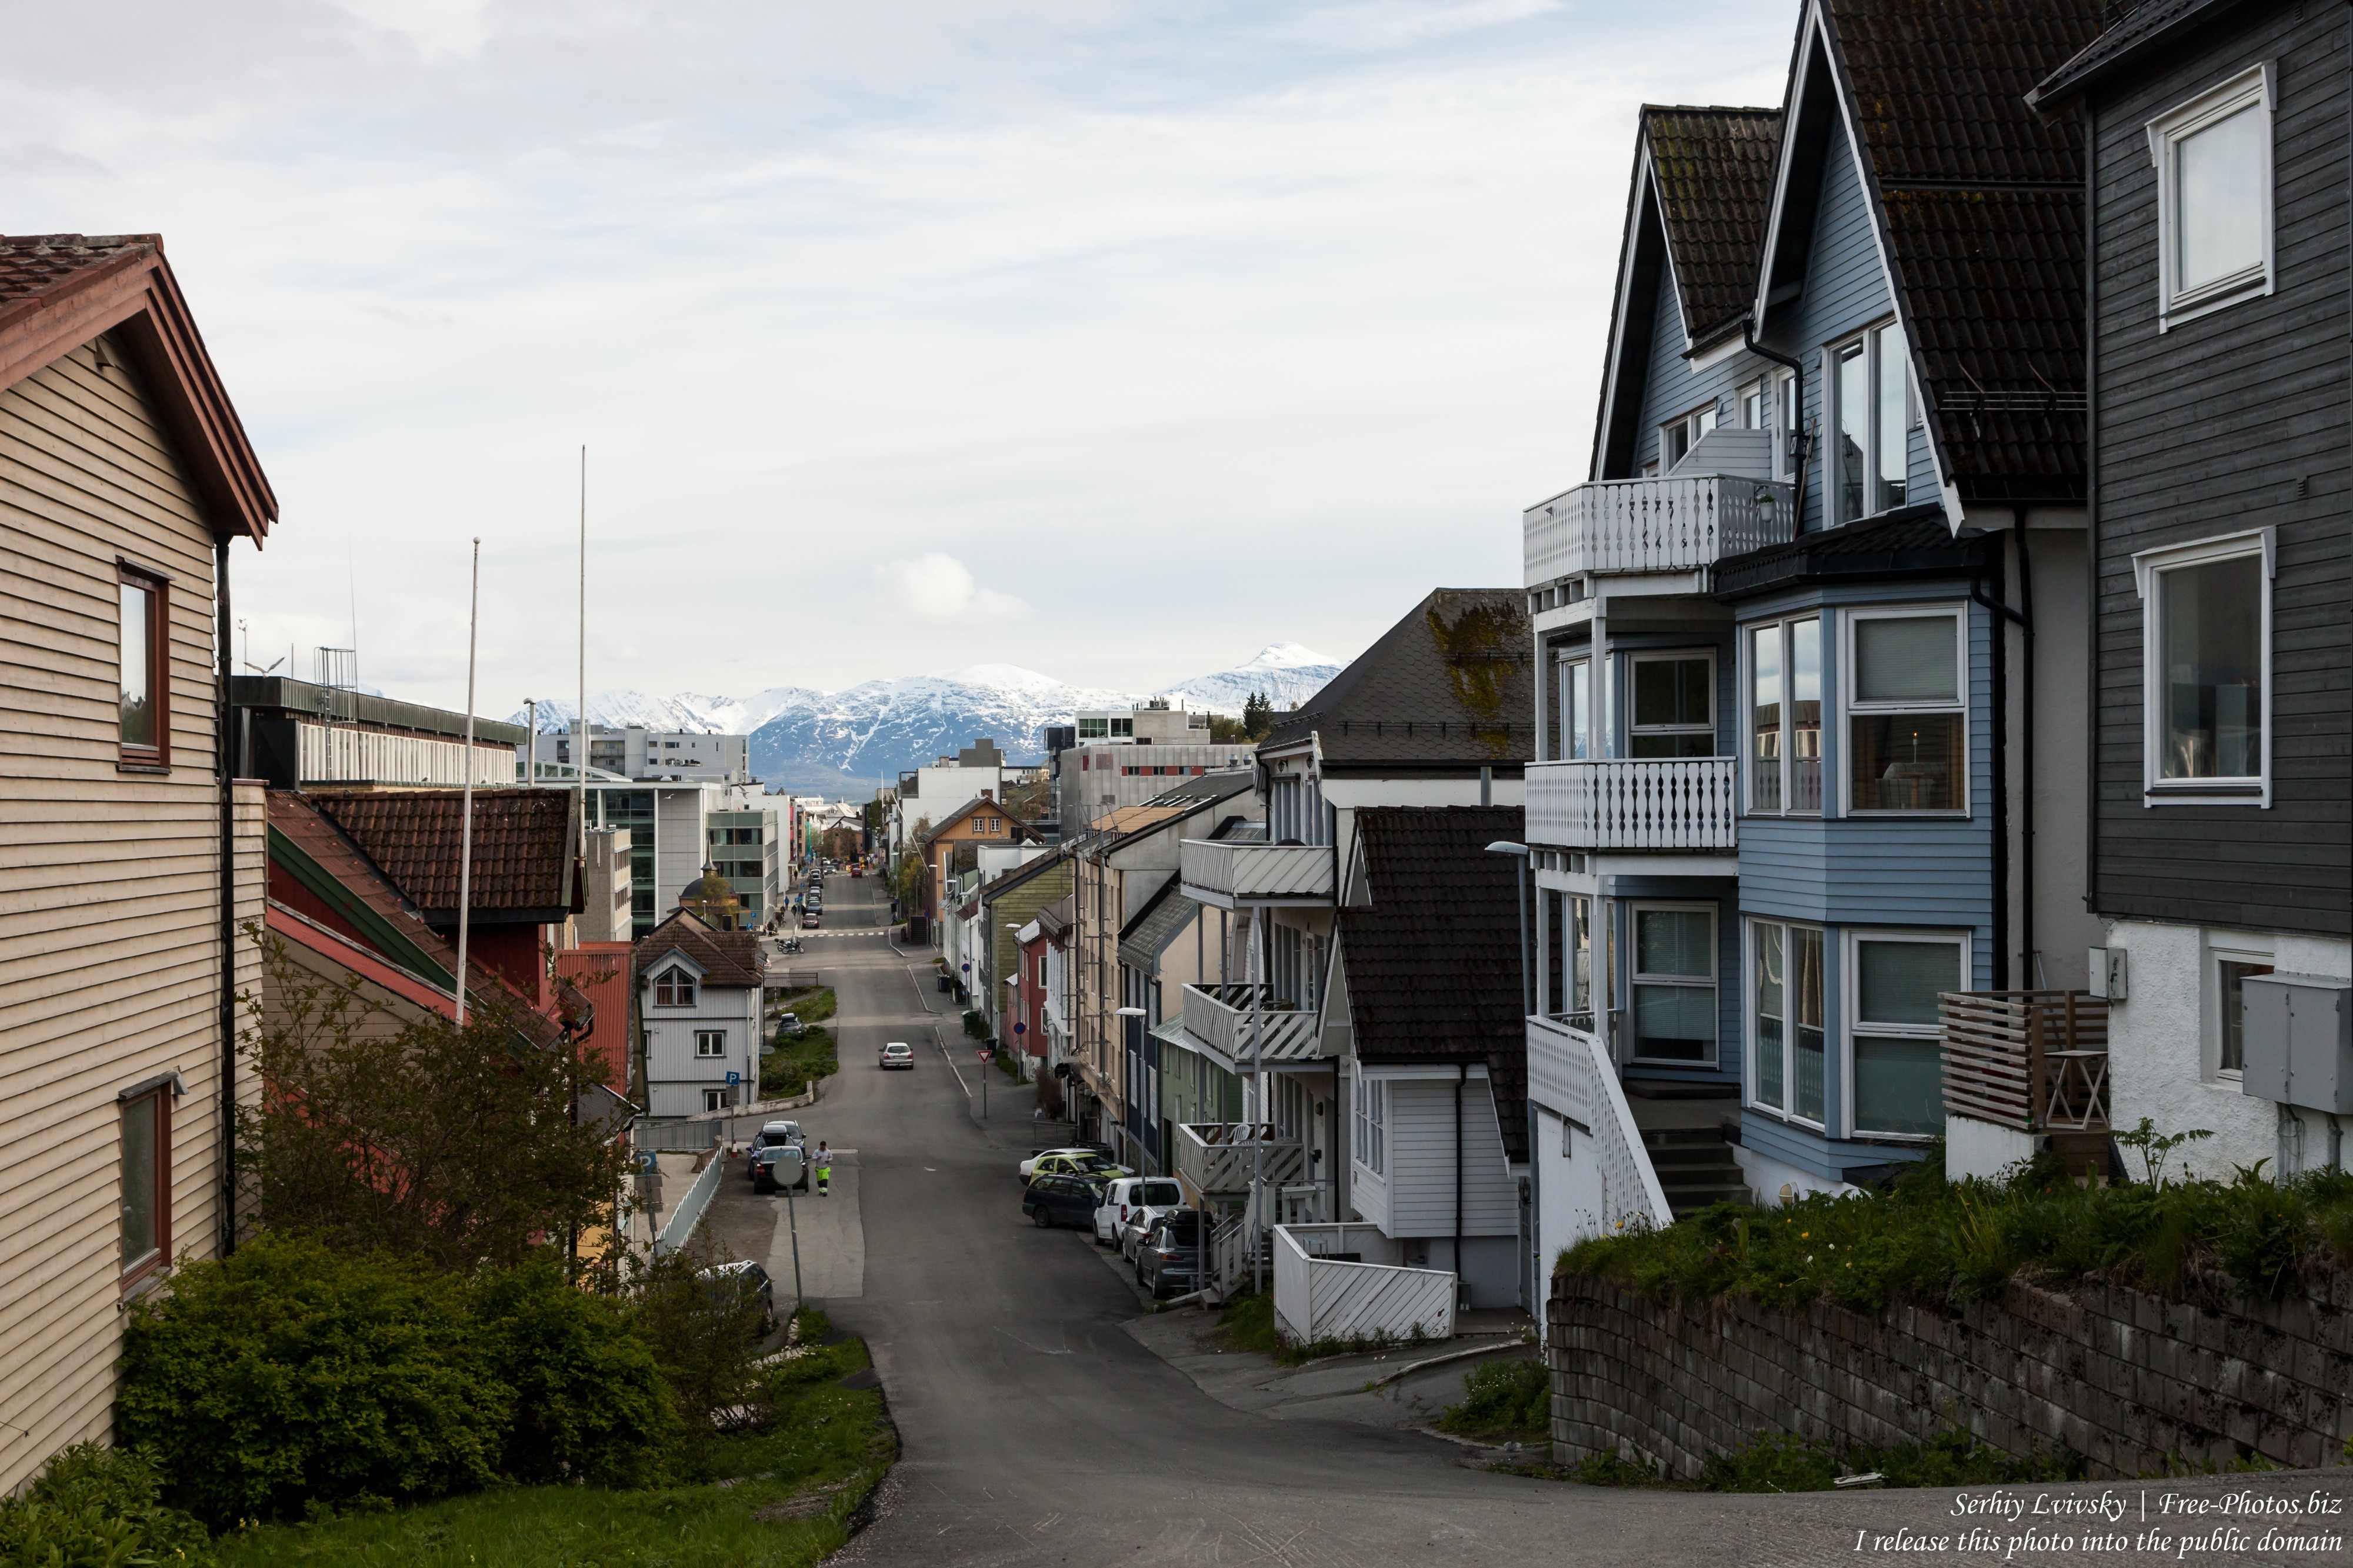 Tromso, Norway, photographed in June 2018 by Serhiy Lvivsky, picture 54